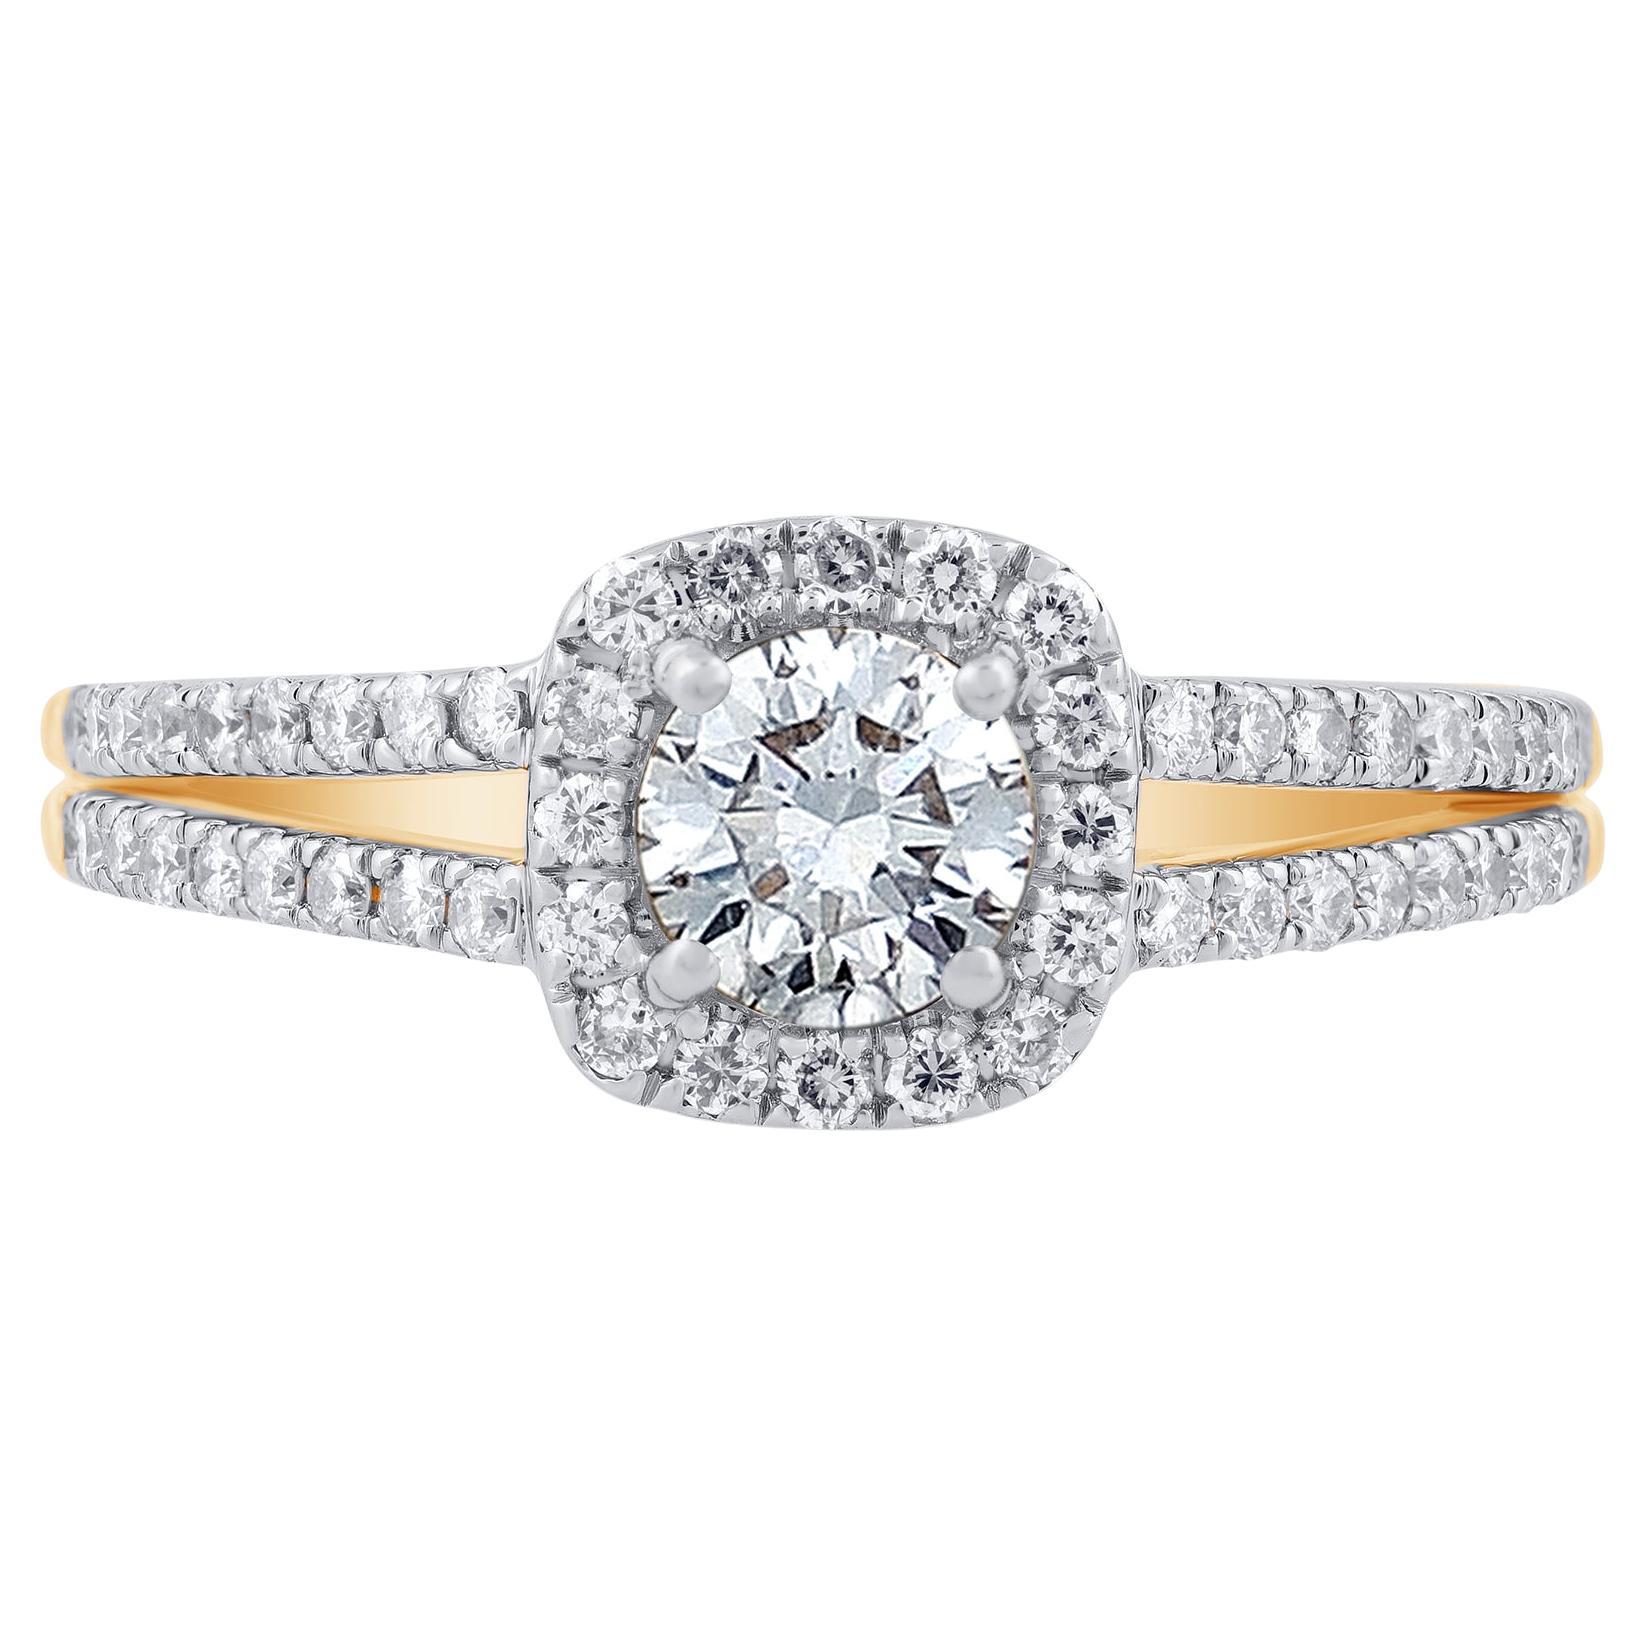 Give a touch of glamour to your fine jewelry collection with this diamond Ring. Crafted in 14KT yellow gold. This split shank ring is studded with 71 single cut & brilliant cut round diamonds in prong and pave setting, and diamonds are graded H-I